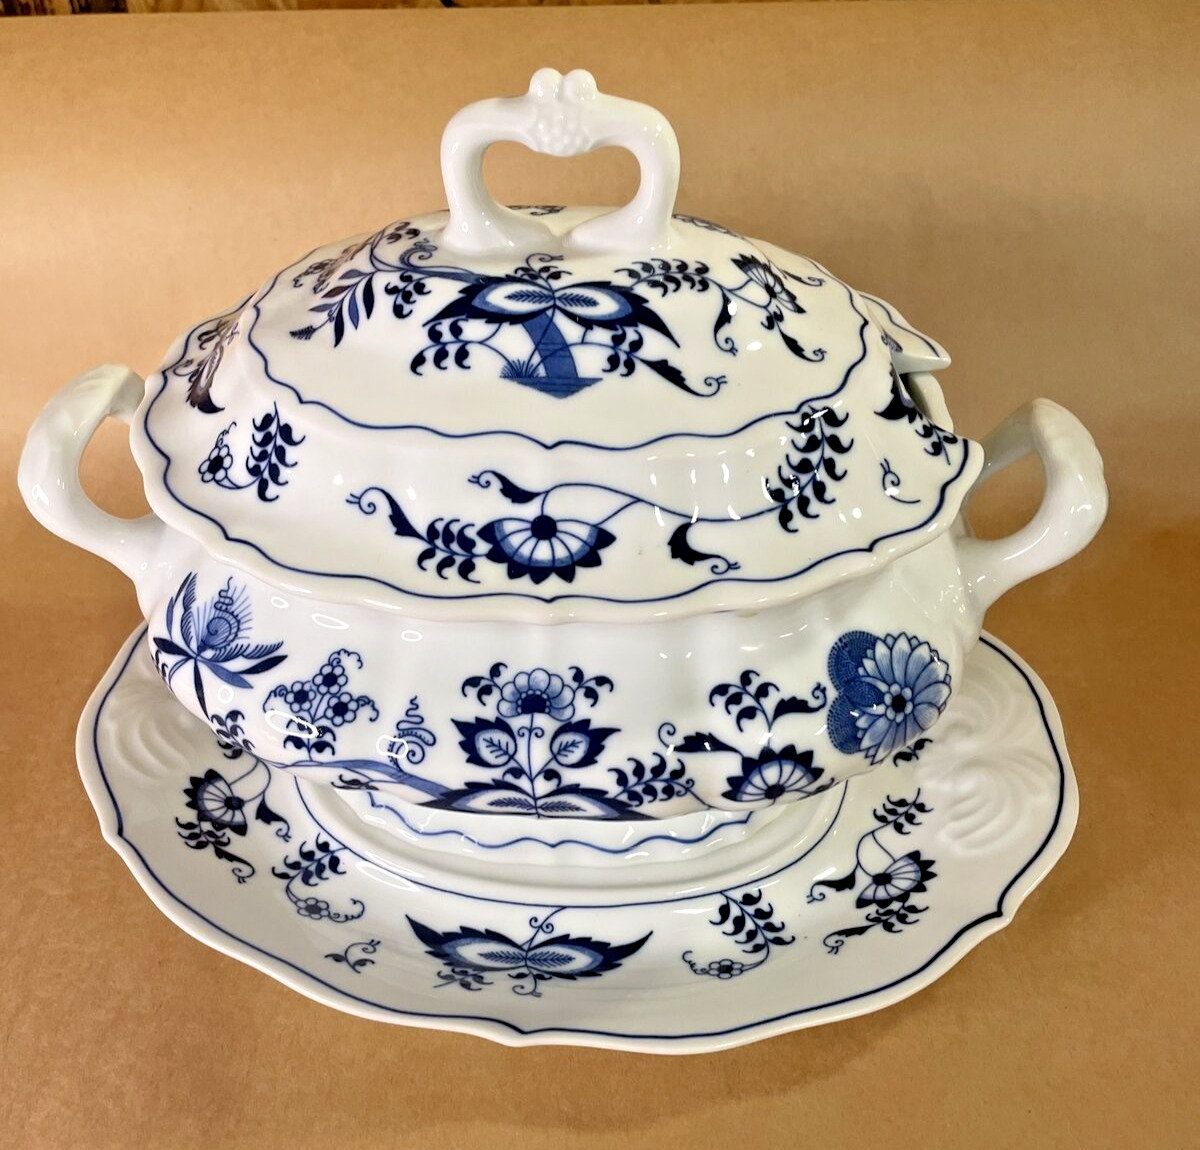 Vintage Blue Danube Soup Tureen and Lid with Under plate. No Ladle